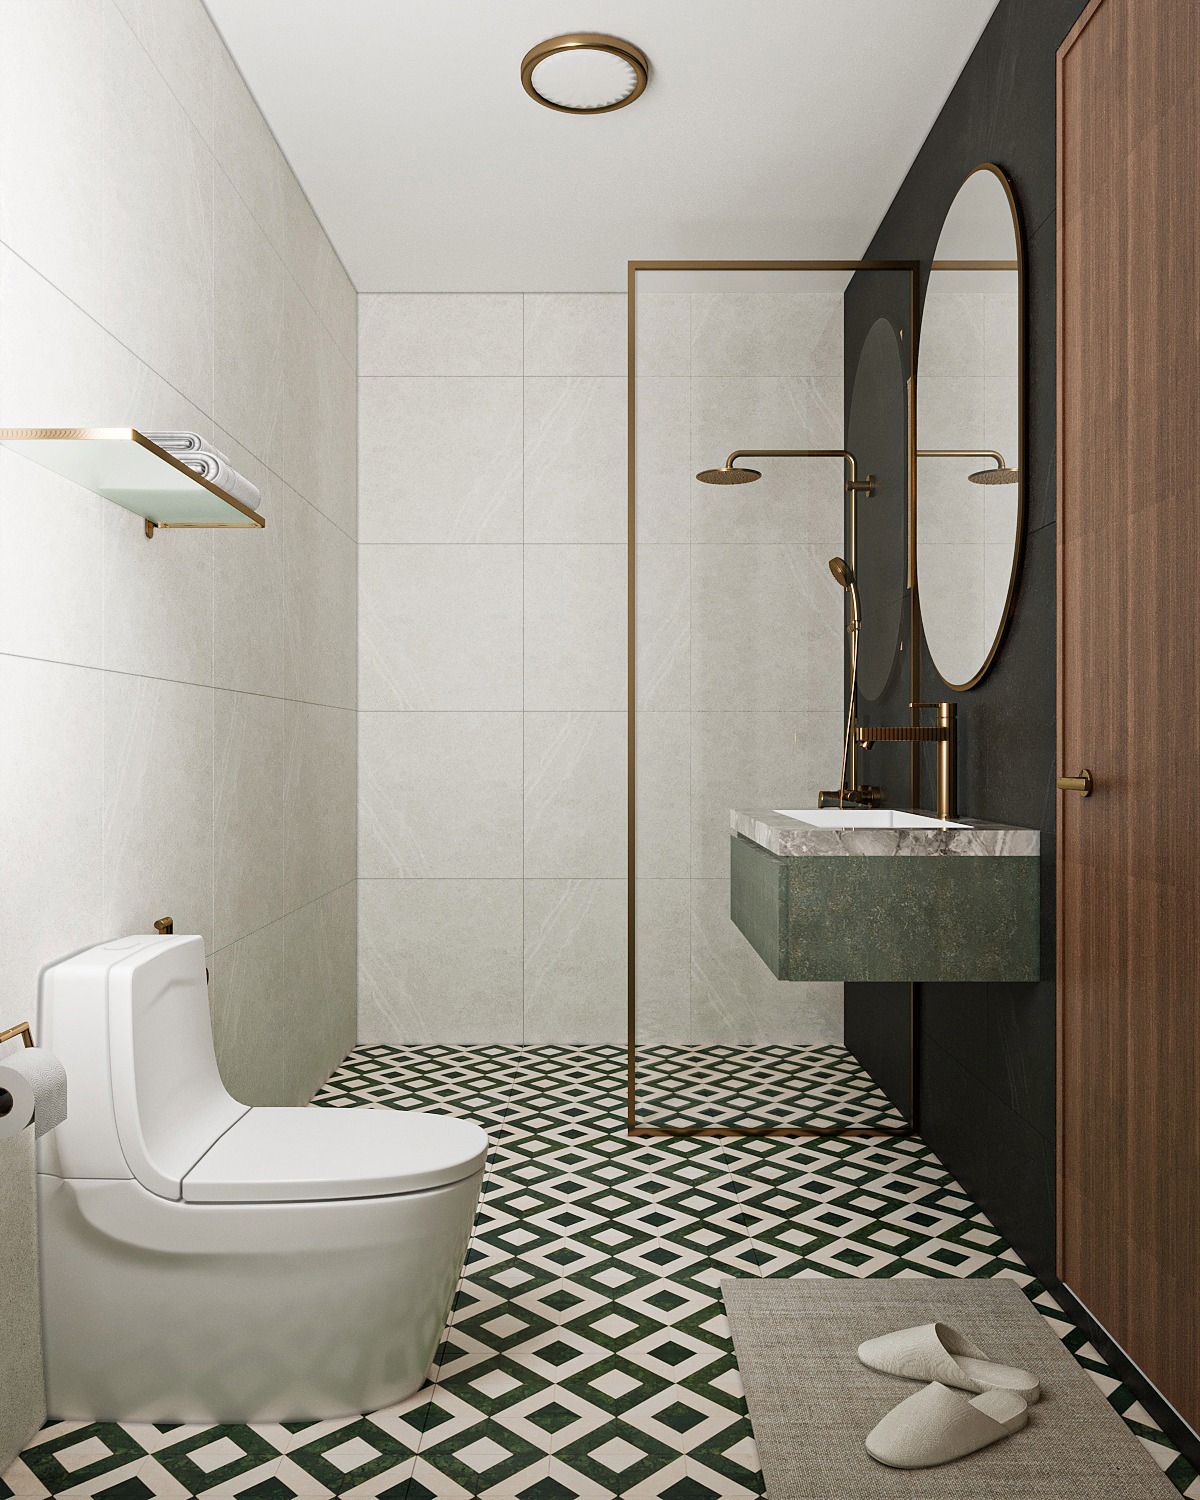 What to consider when renovating your bathroom